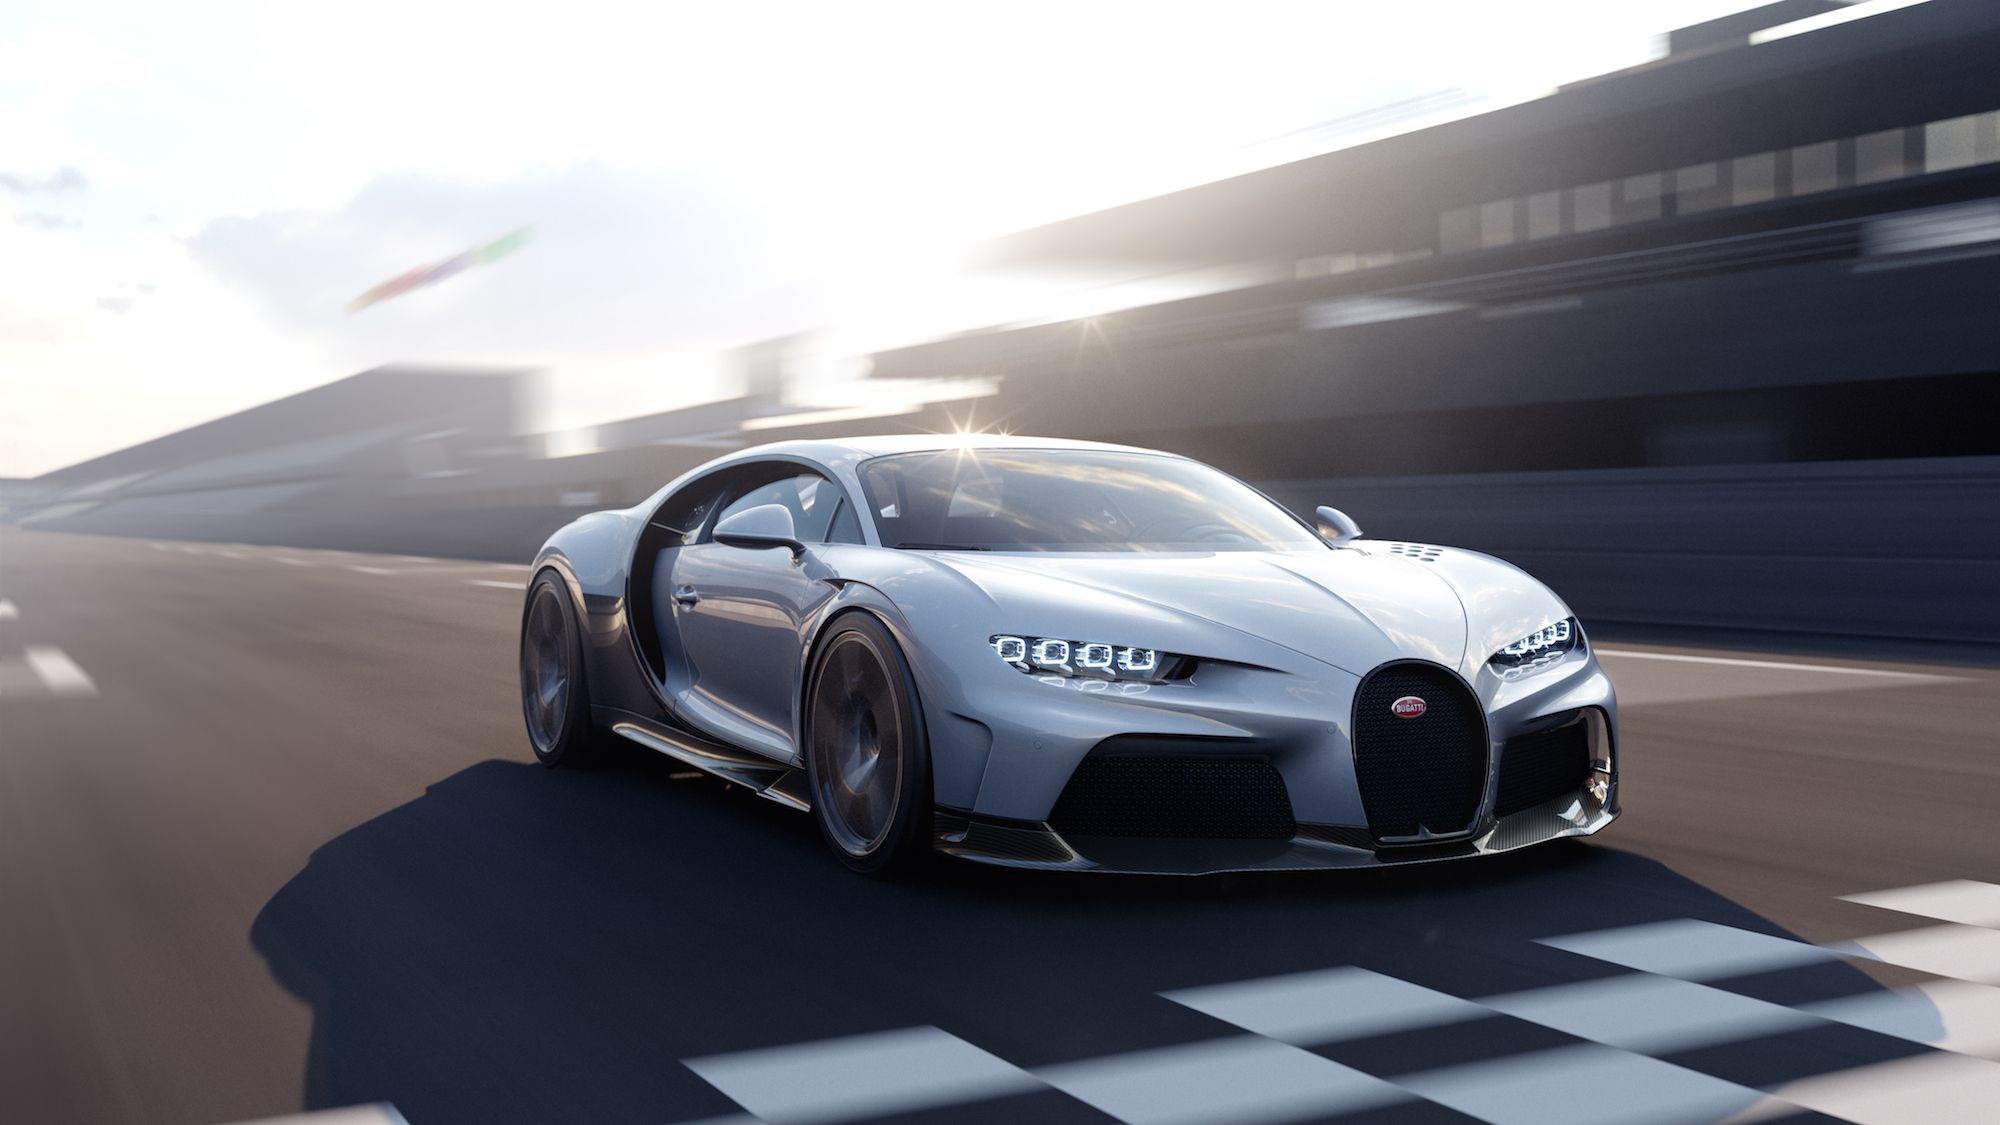 Bugatti Chiron Super Sport 300+ Hits Speeds in Excess of 300 MPH - iLusso